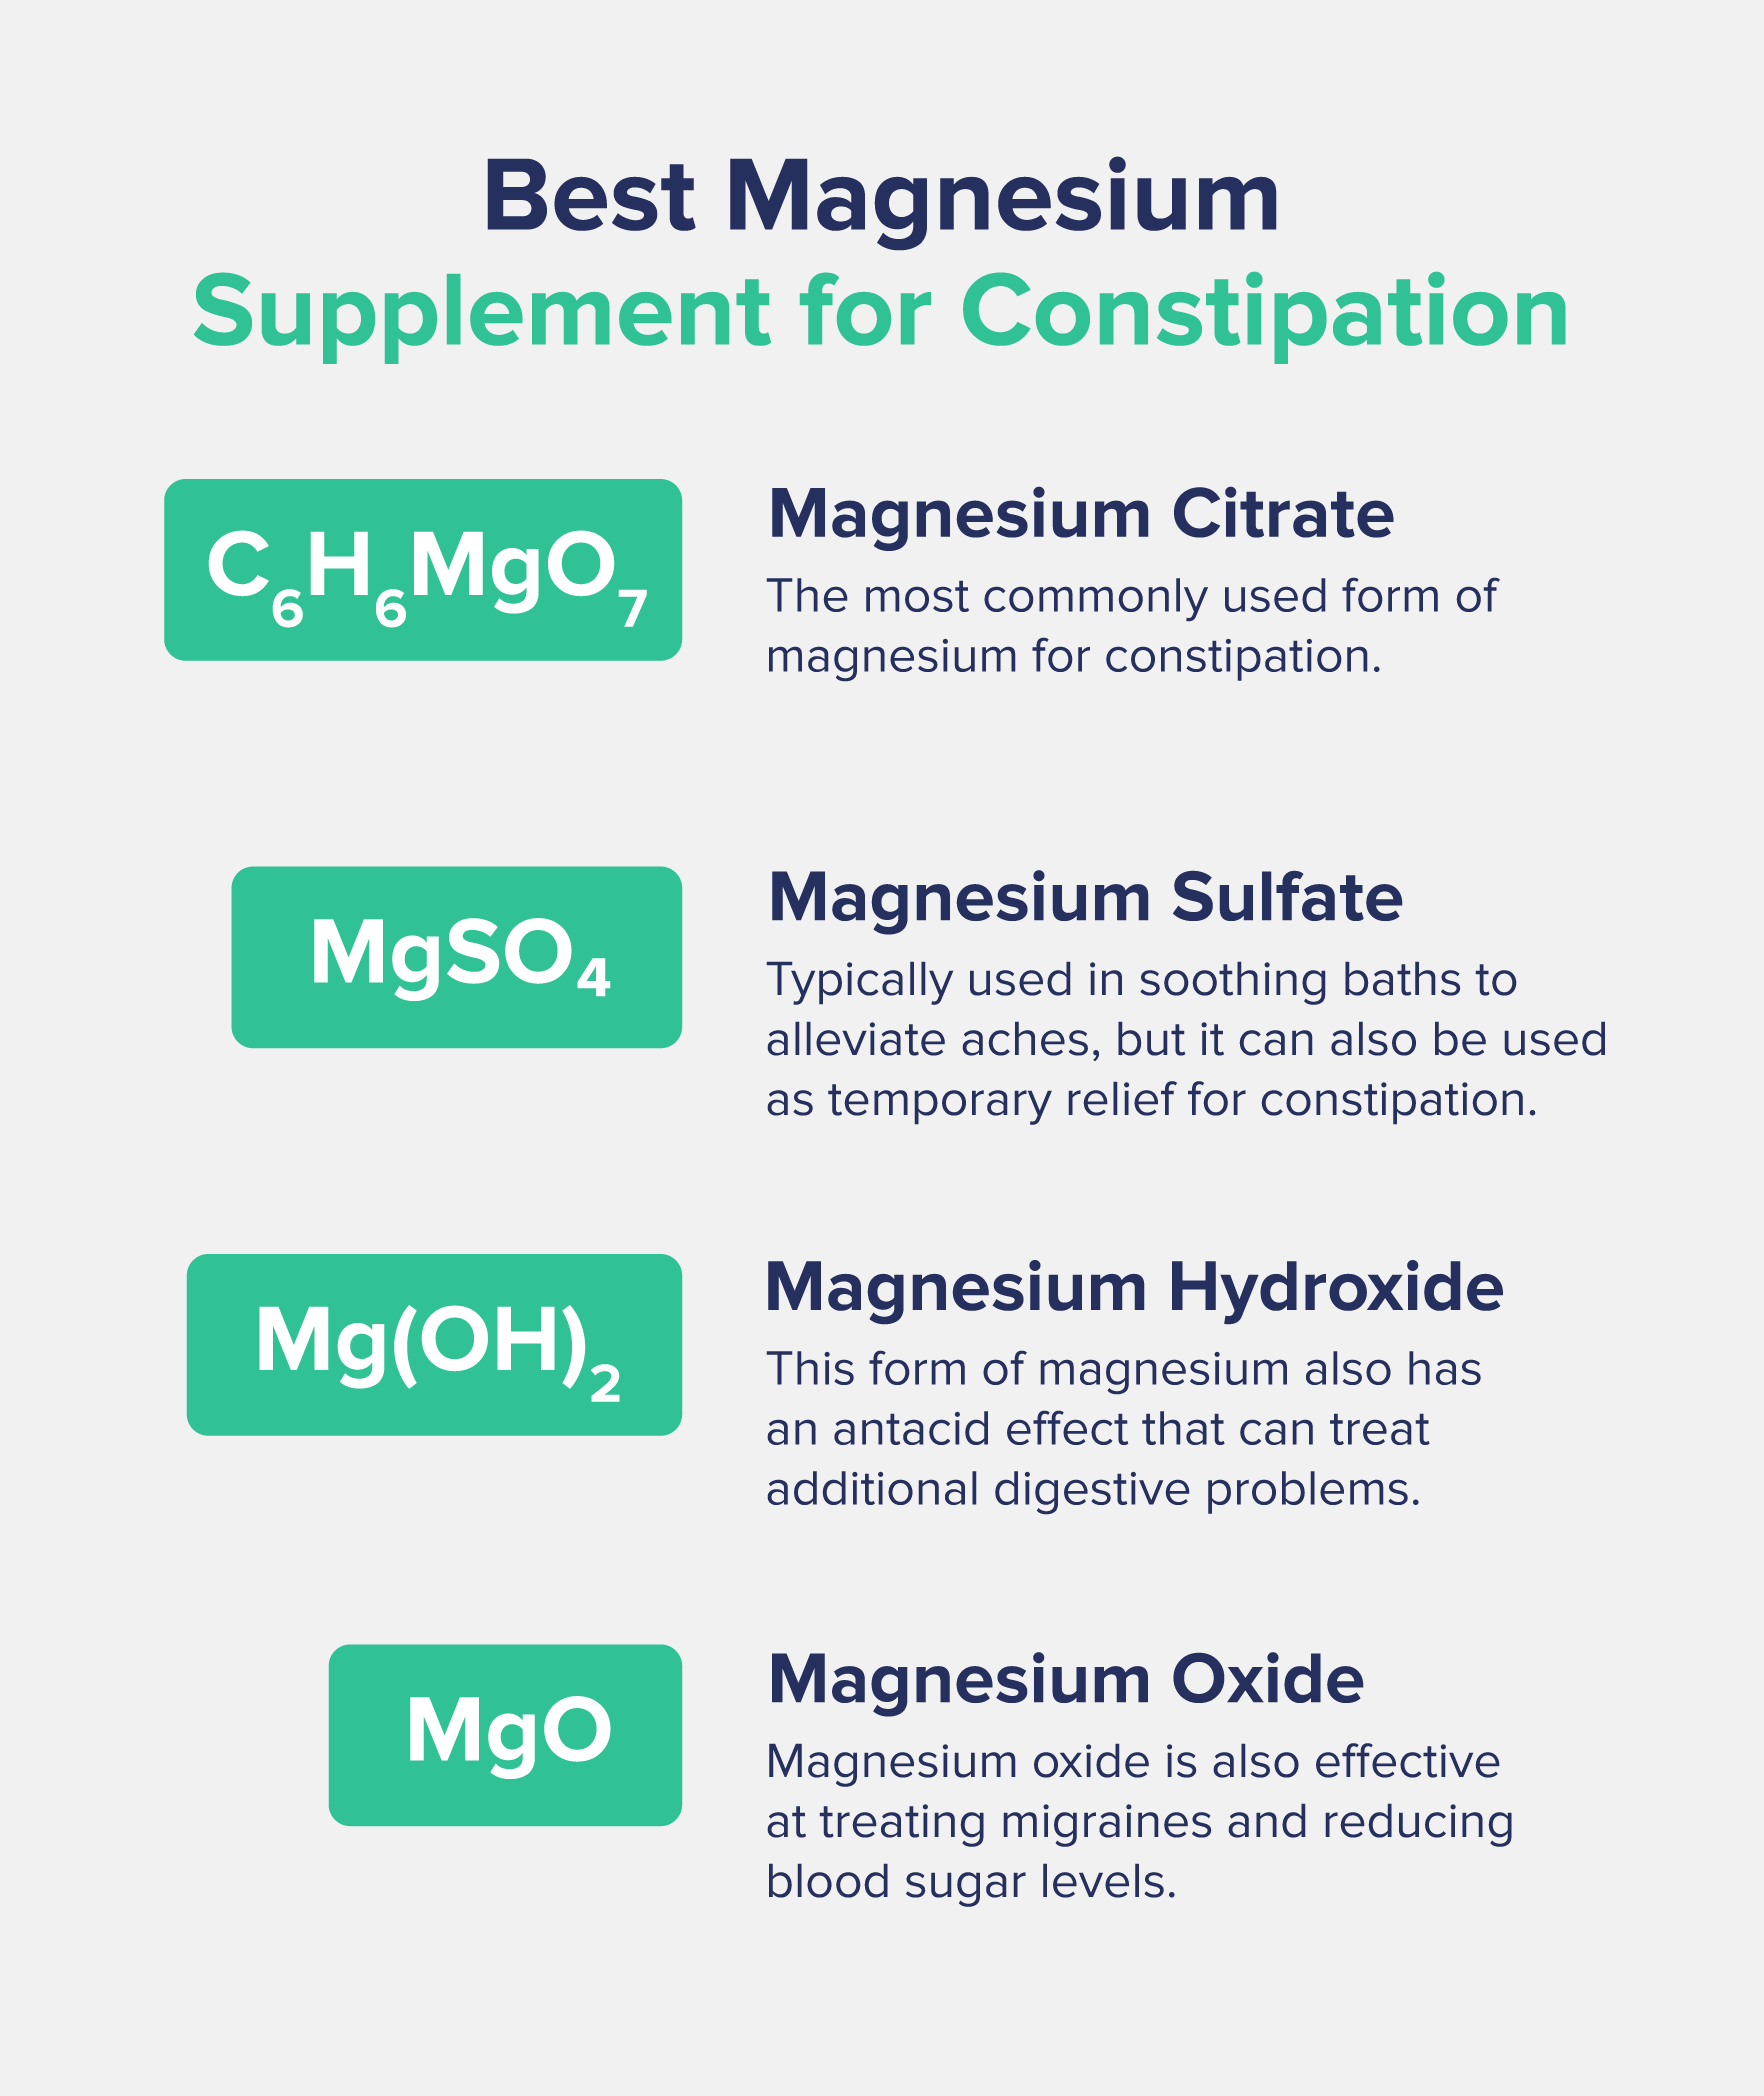 A graphic entitled "Best Magnesium Supplement for Constipation" depicting the chemical formulas of different magnesium-based compounds along with short descriptions of their uses and benefits.